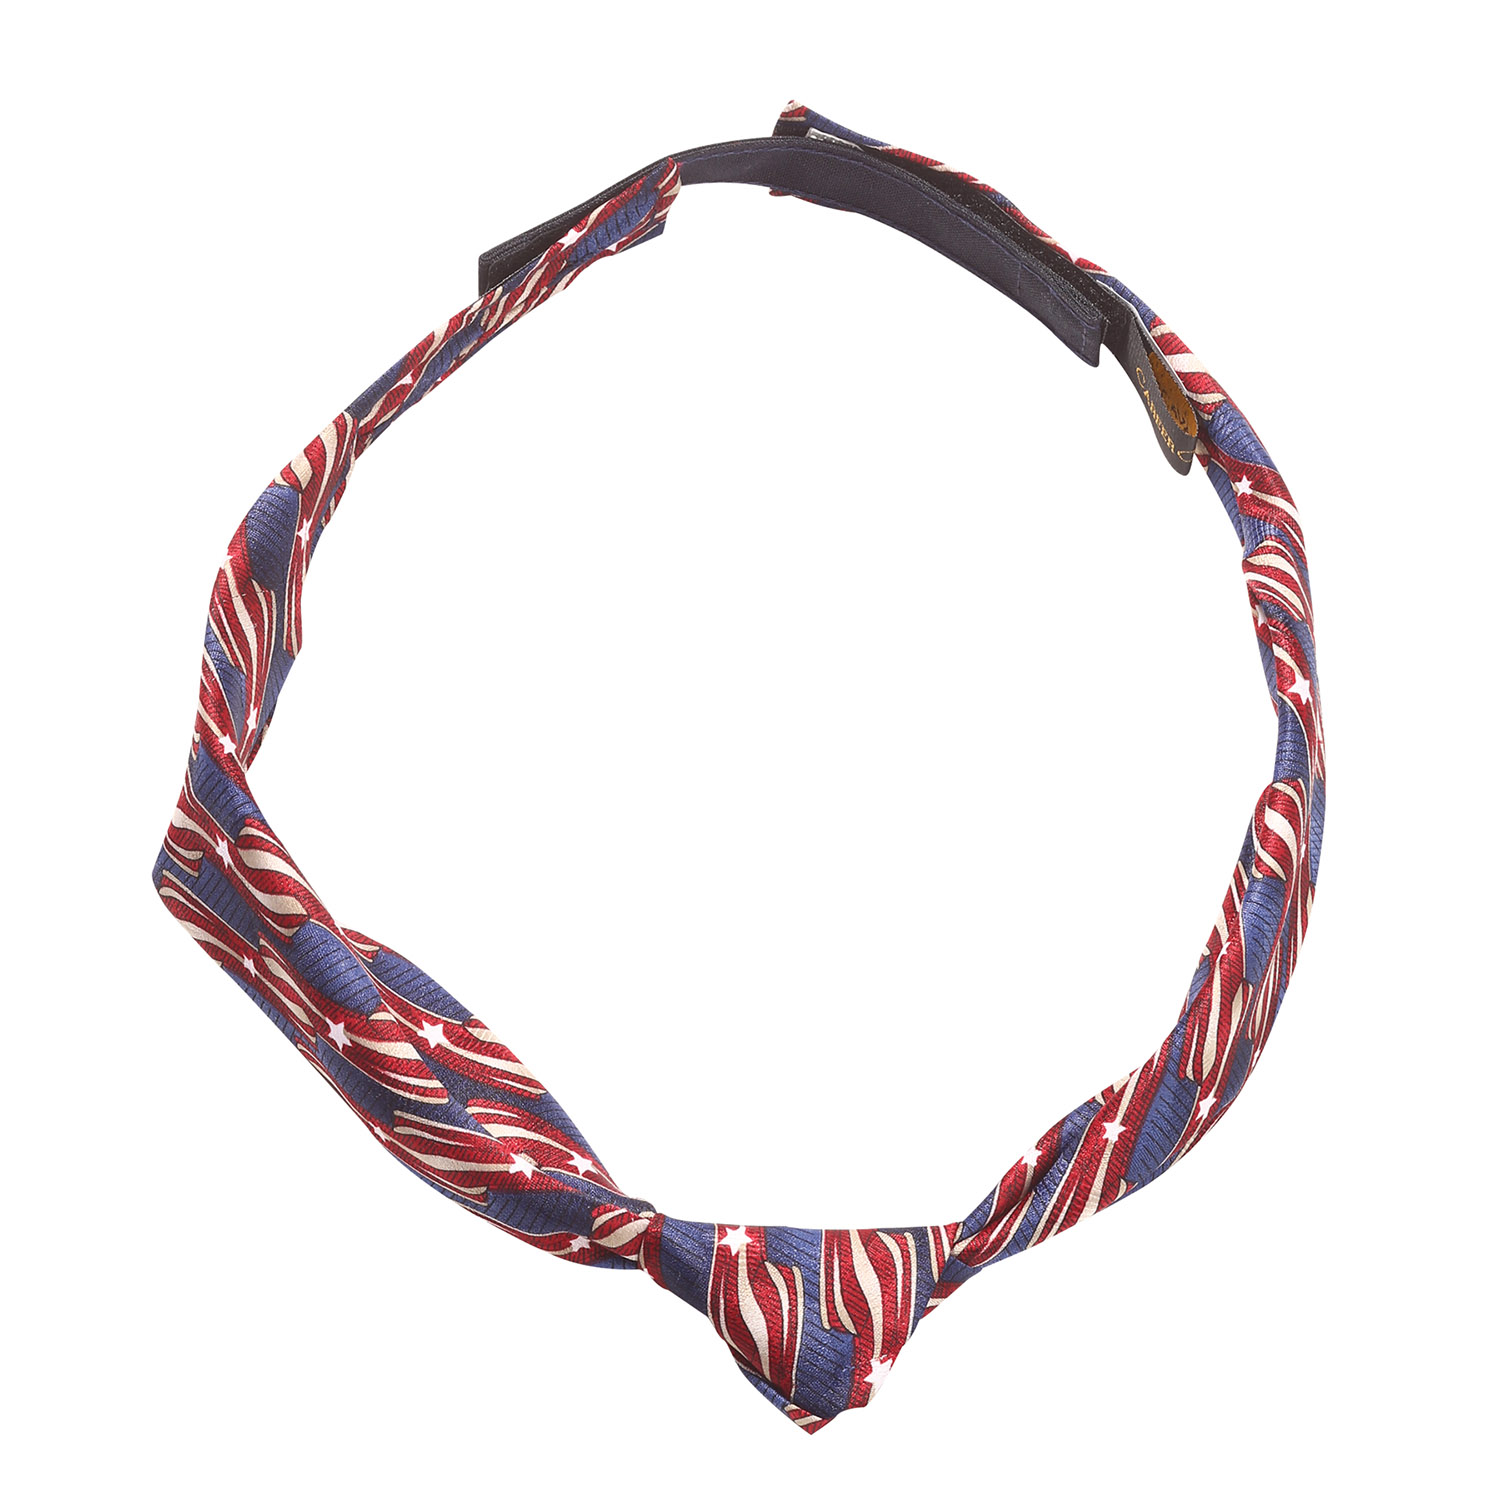 NEW KNOTTED TIE FEMALE POSTAL STARS AND STRIPES